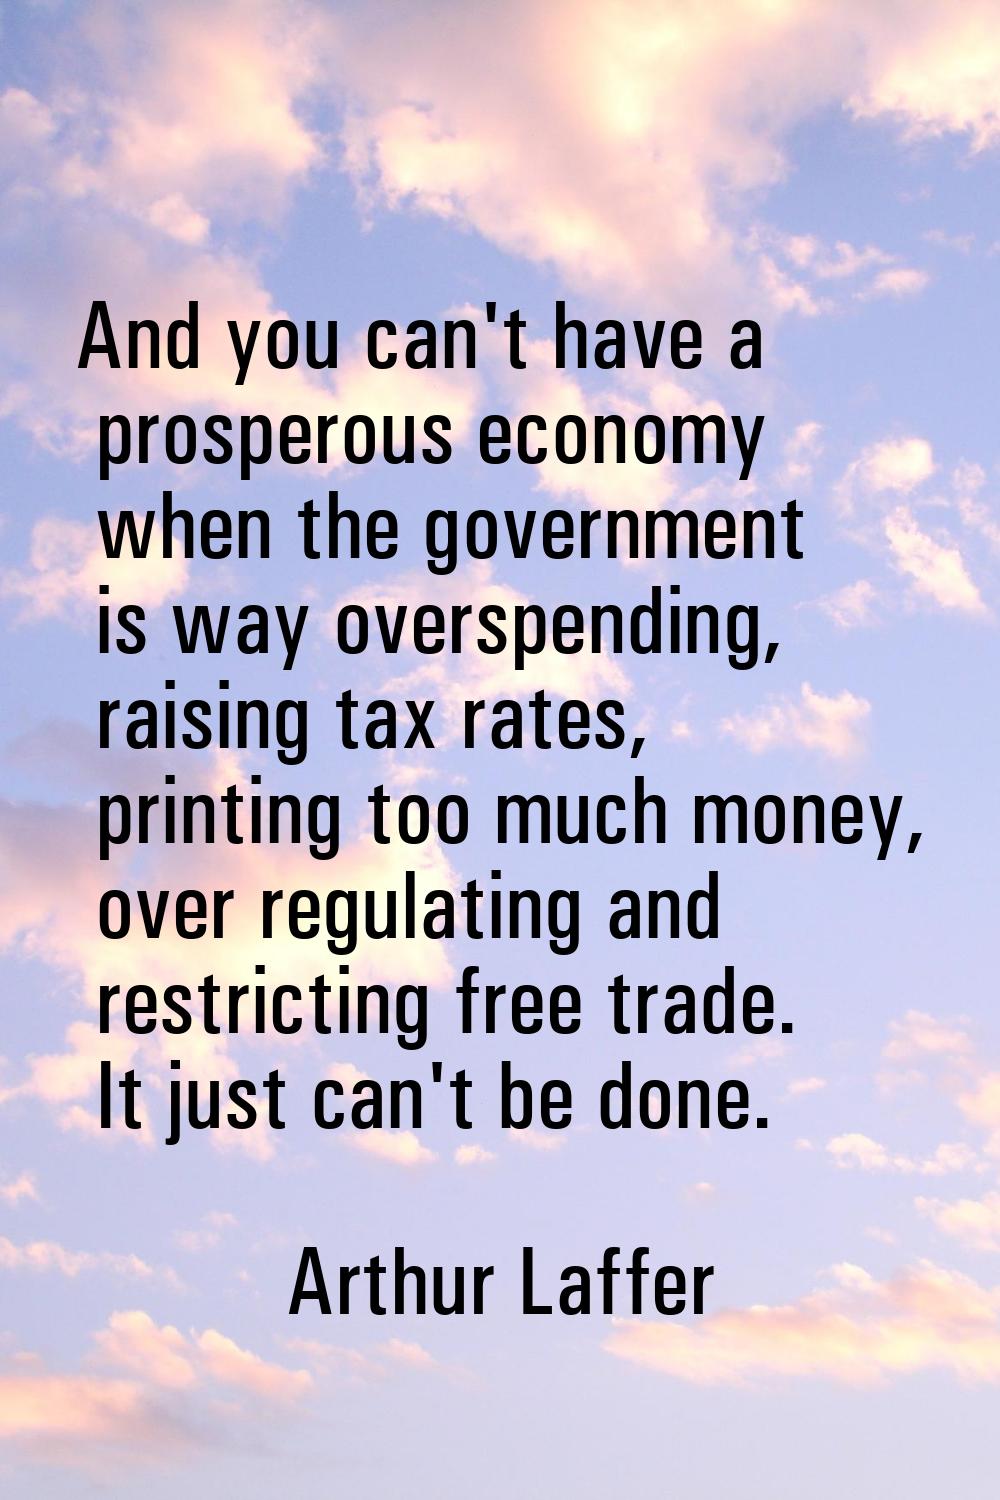 And you can't have a prosperous economy when the government is way overspending, raising tax rates,